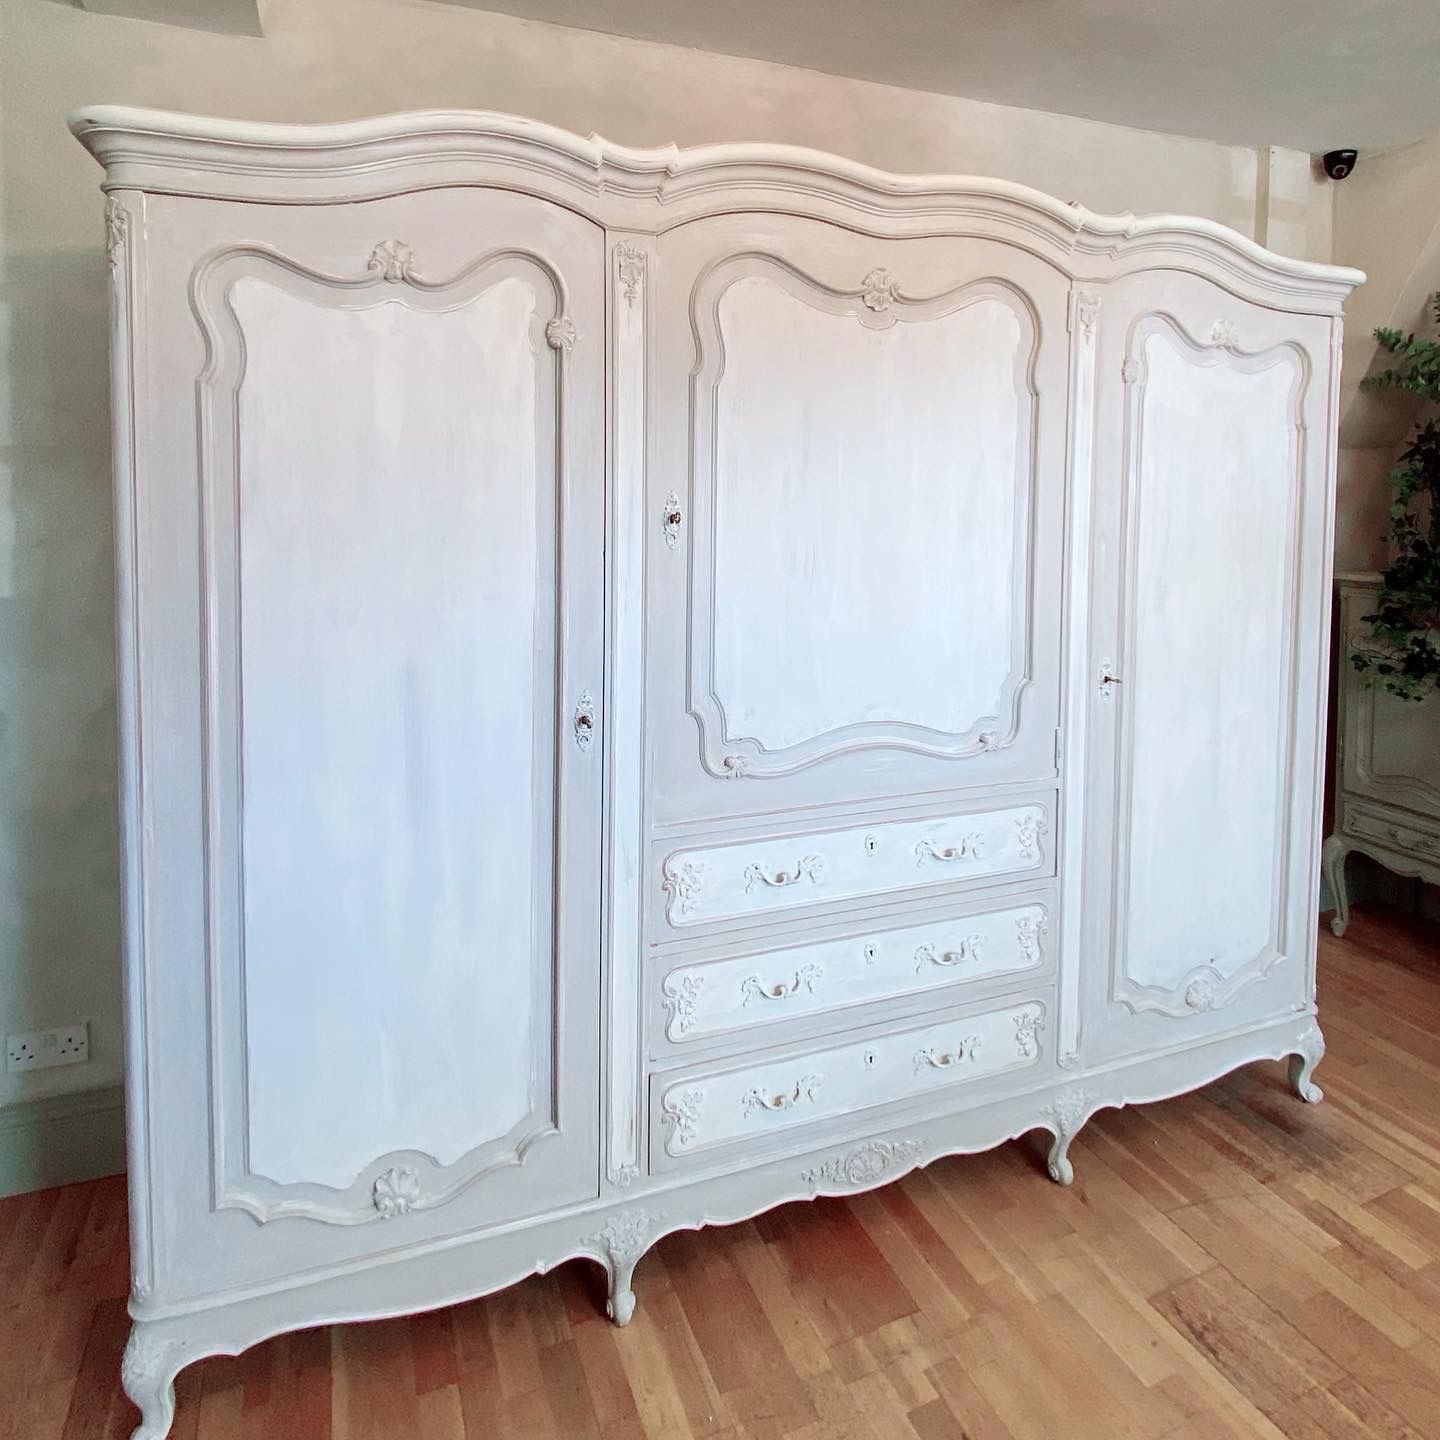 French 3 Door Armoire | Village Chic In 3 Door French Wardrobes (View 4 of 15)